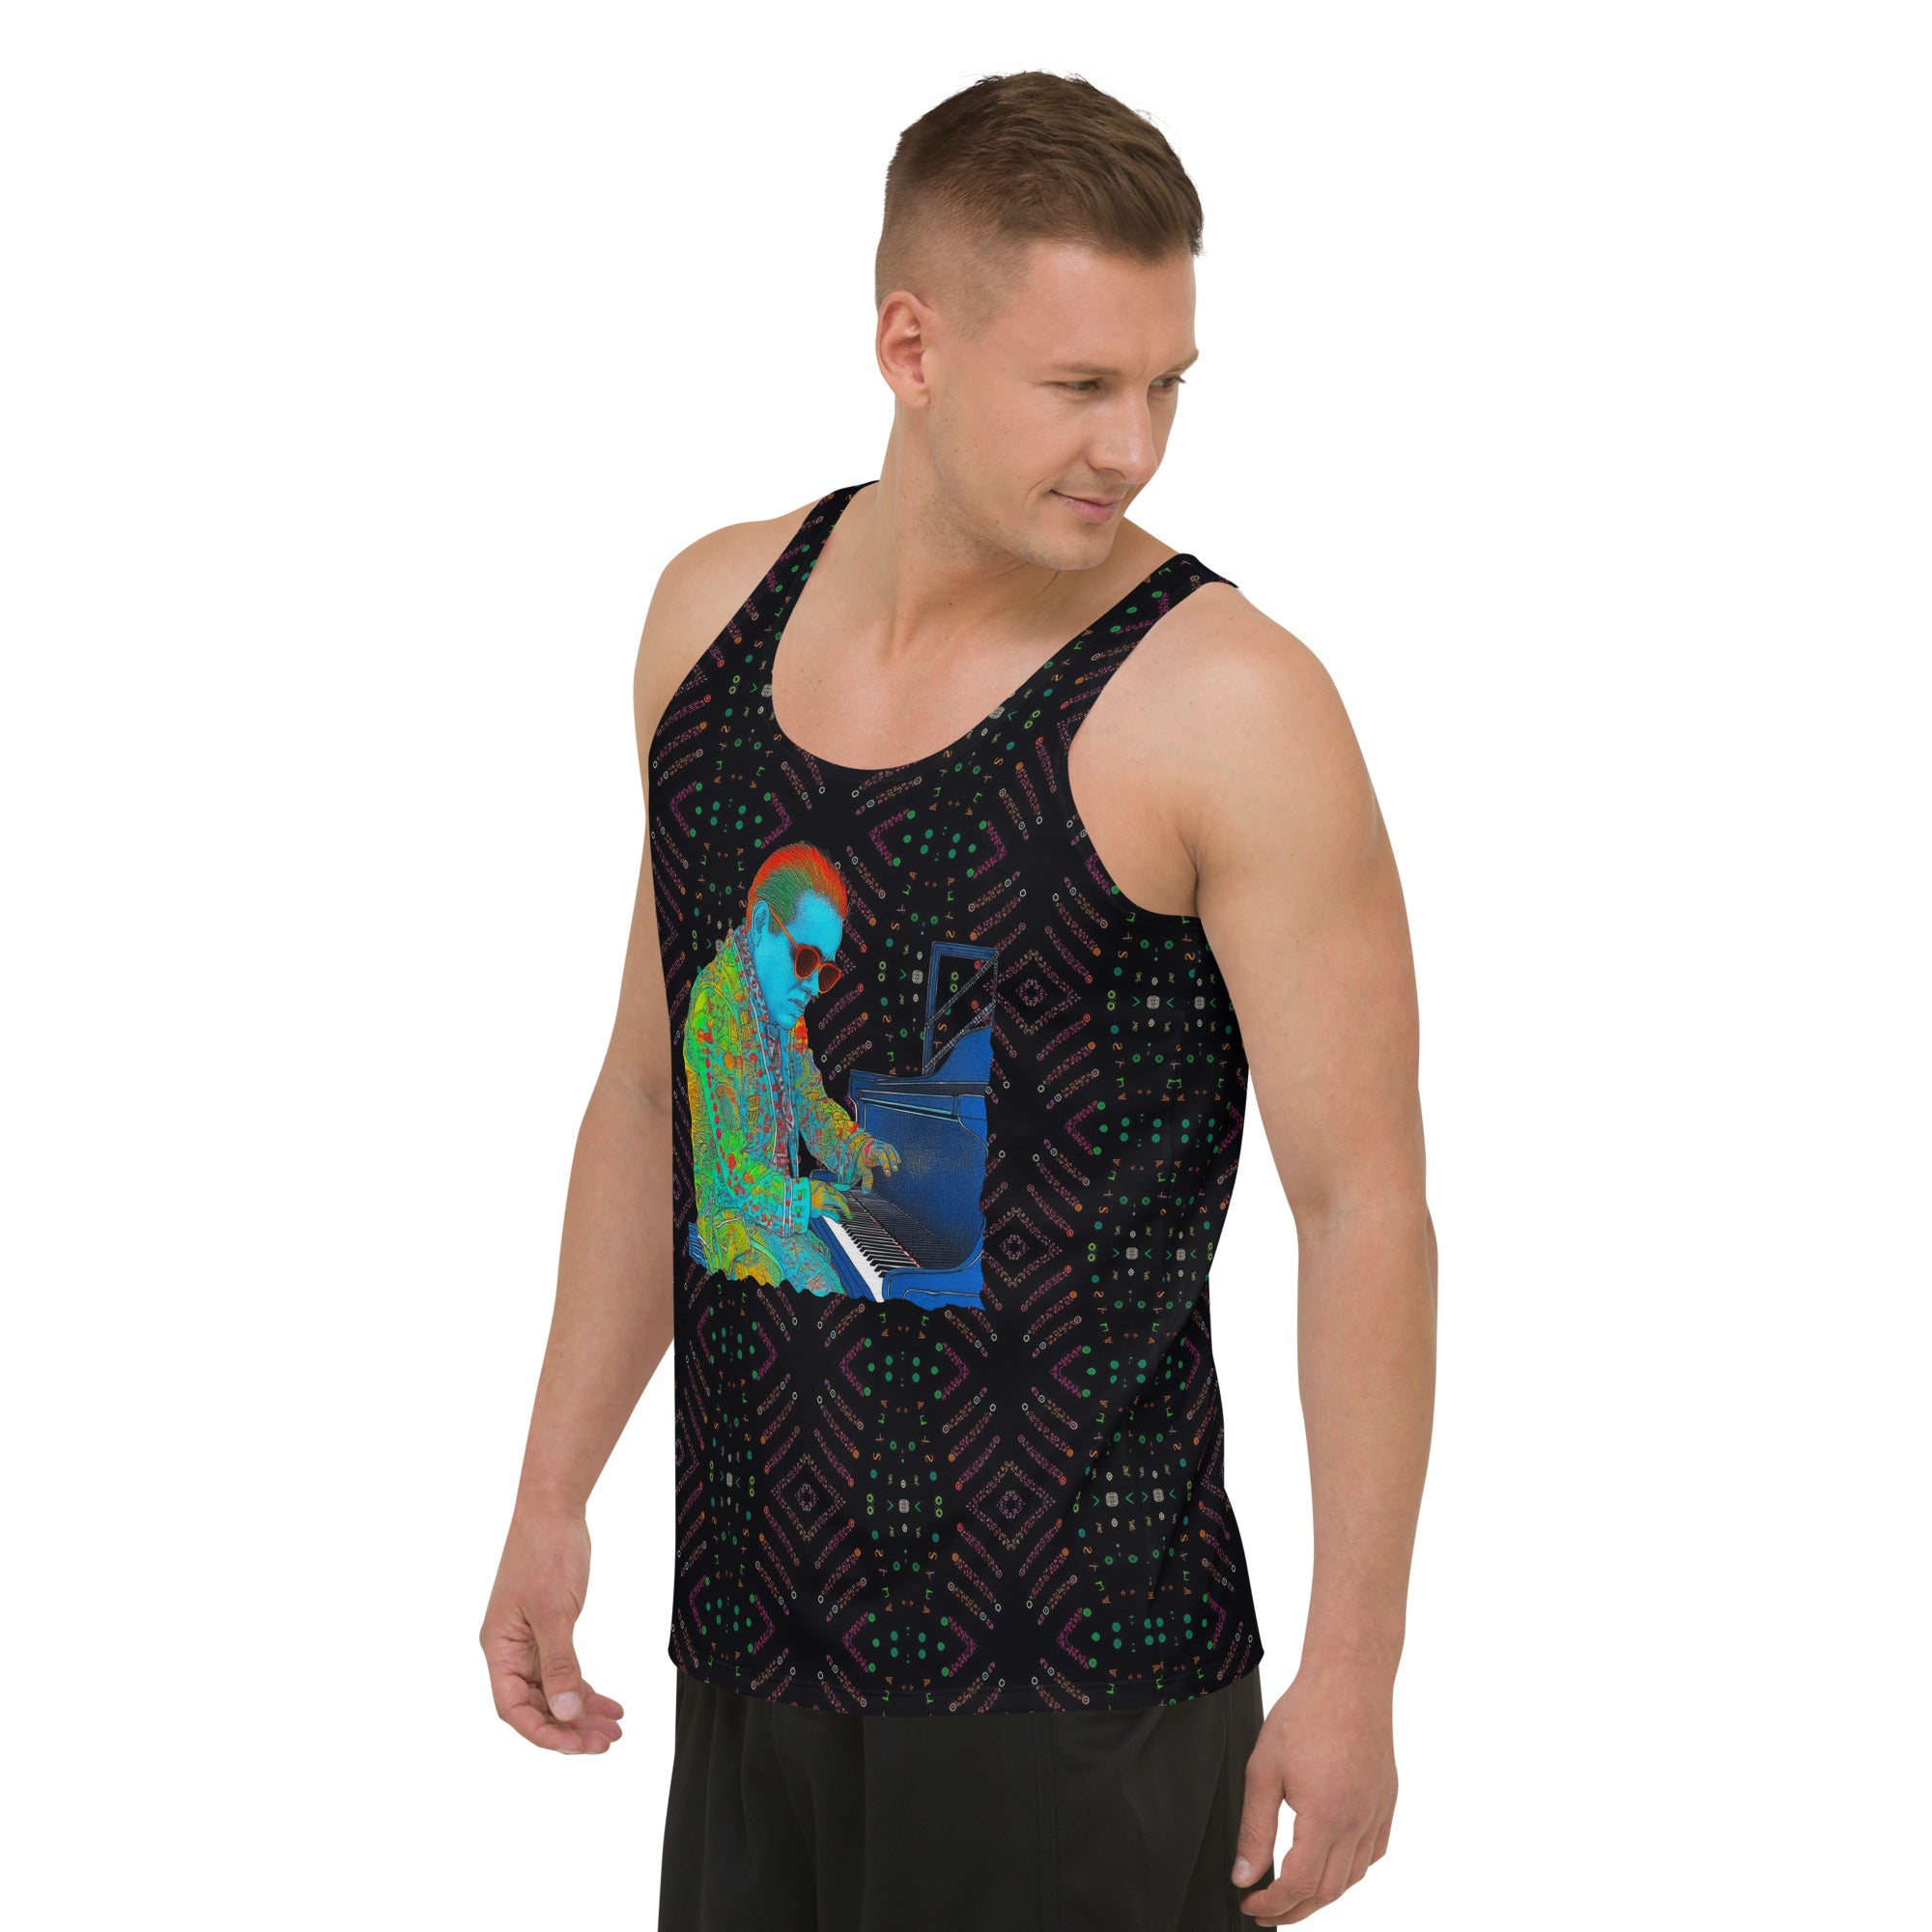 Close-up of the vibrant sketch artwork on men's sleeveless top.